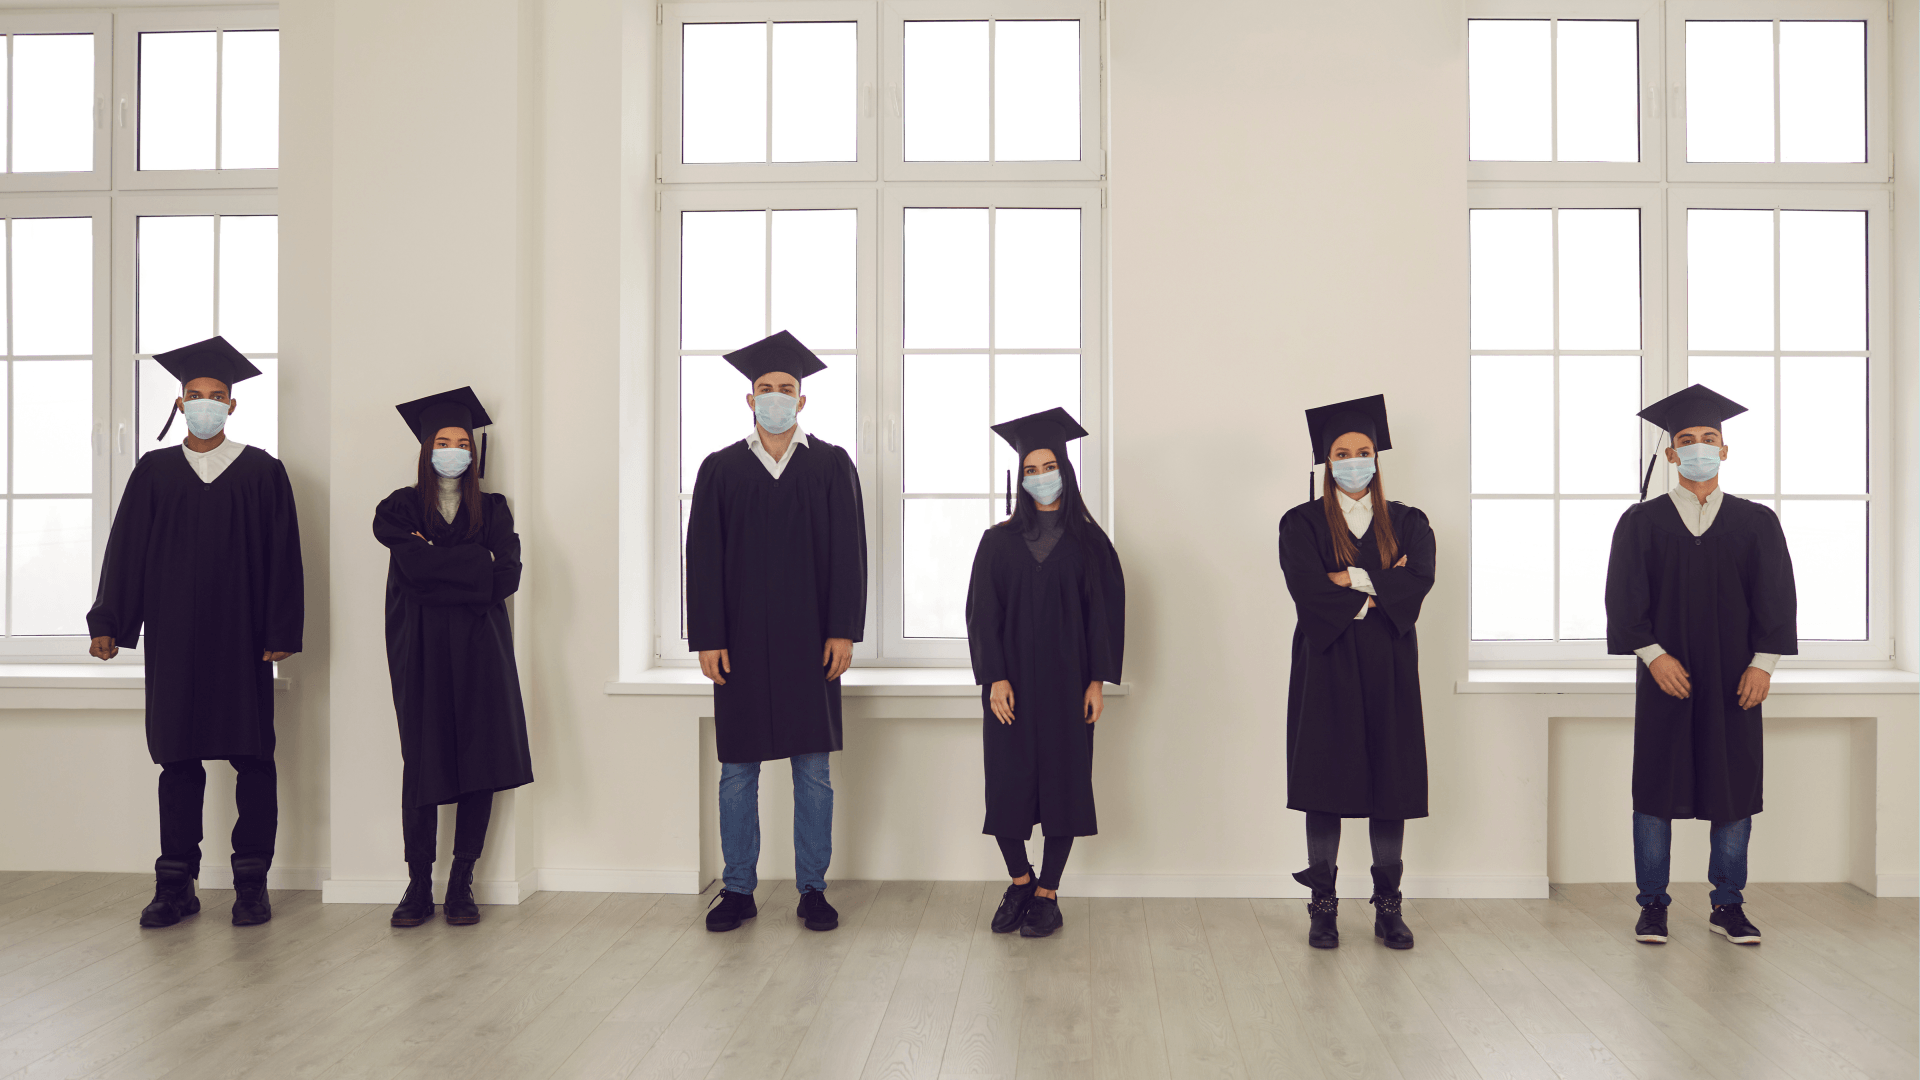 Image showing people in graduation gowns and caps, wearing masks